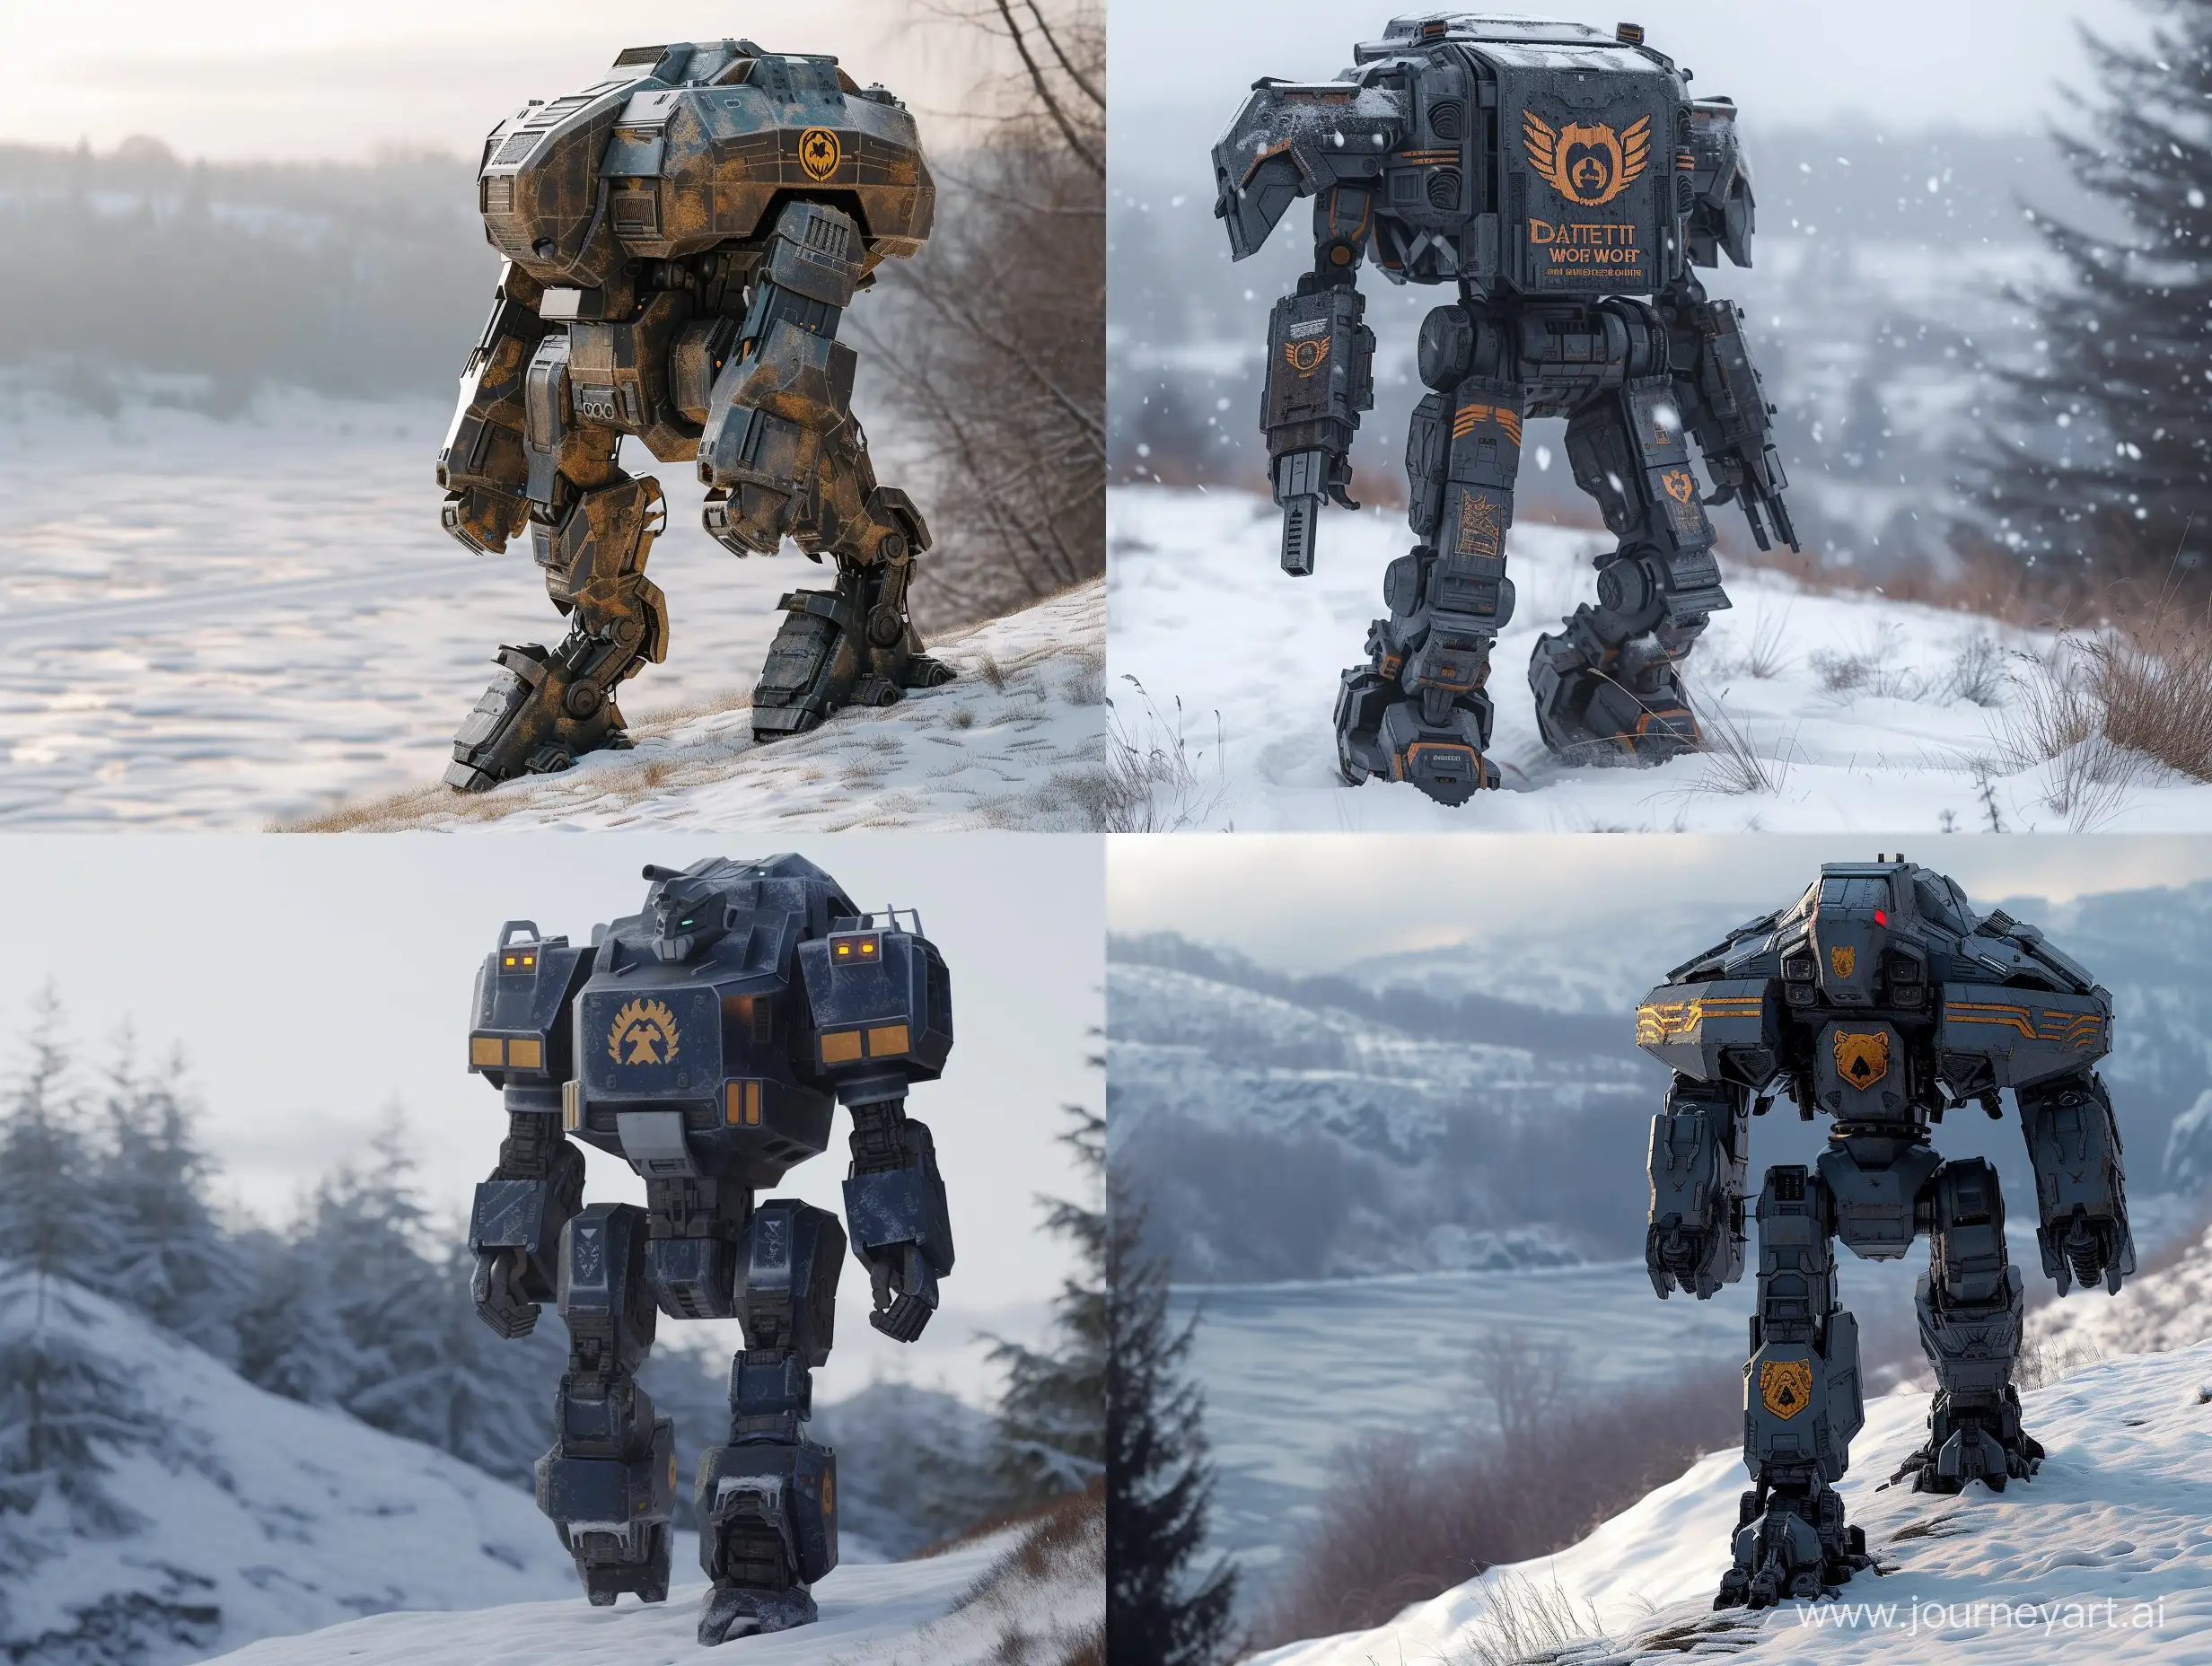 Battletech setting, Timber Wolf omnimech walking along the snowy hill, clan Ghost Bear insignia on robot's armor, sci-fi, highly detailed, realistic